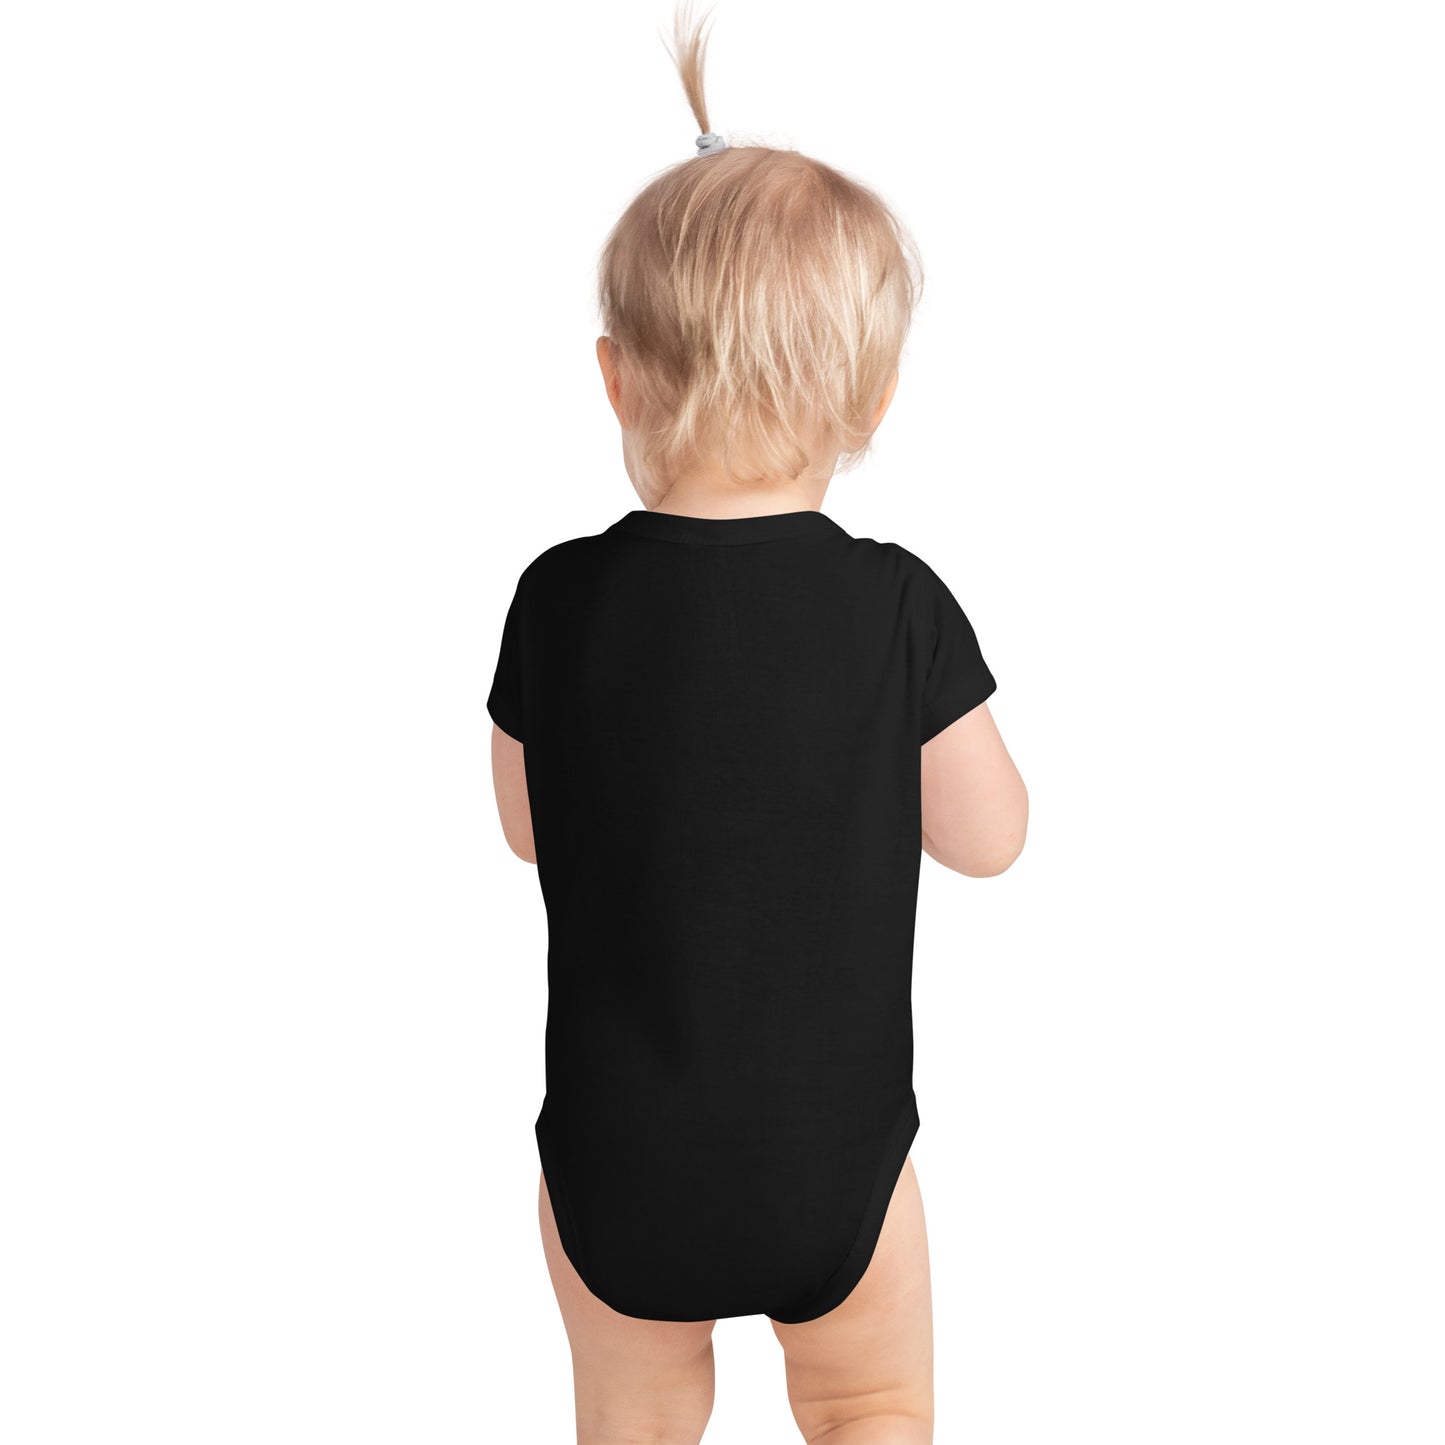 First "Catsuit" - Infant Onesie